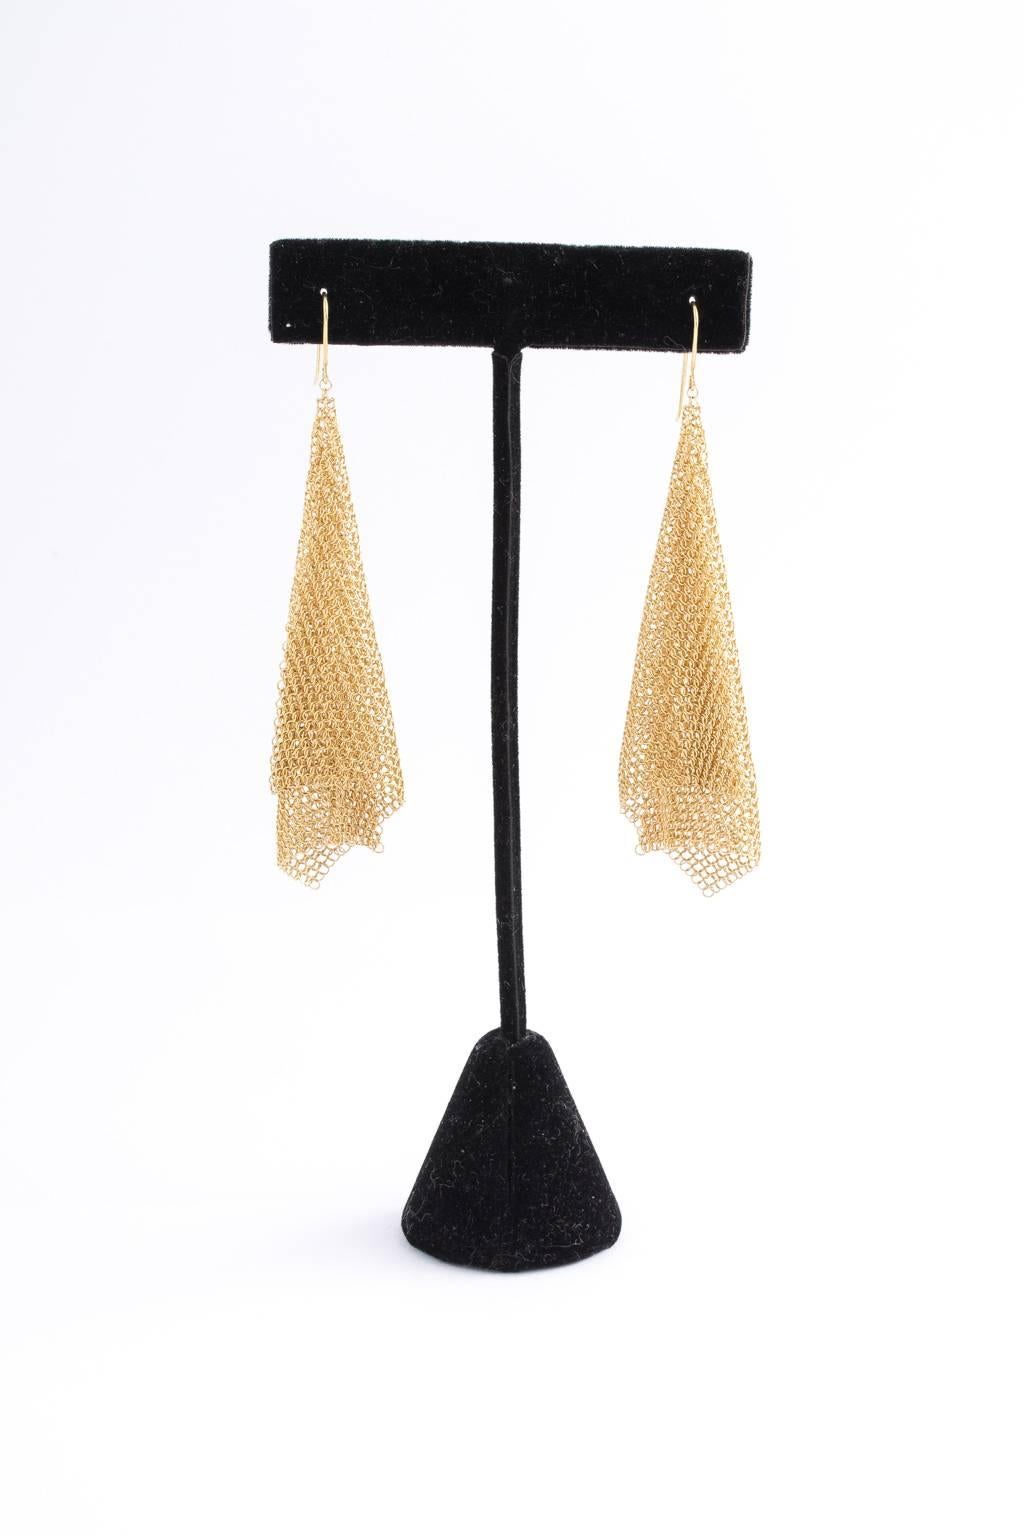  Large- Iconic Tiffany designer Elsa Peretti has created ergonomic mesh earings that are both unusual in construction and design. A classic to own and enjoy forever. These look beautiful on everyone. Tiffany and Co. 18kt gold. Mid Century to